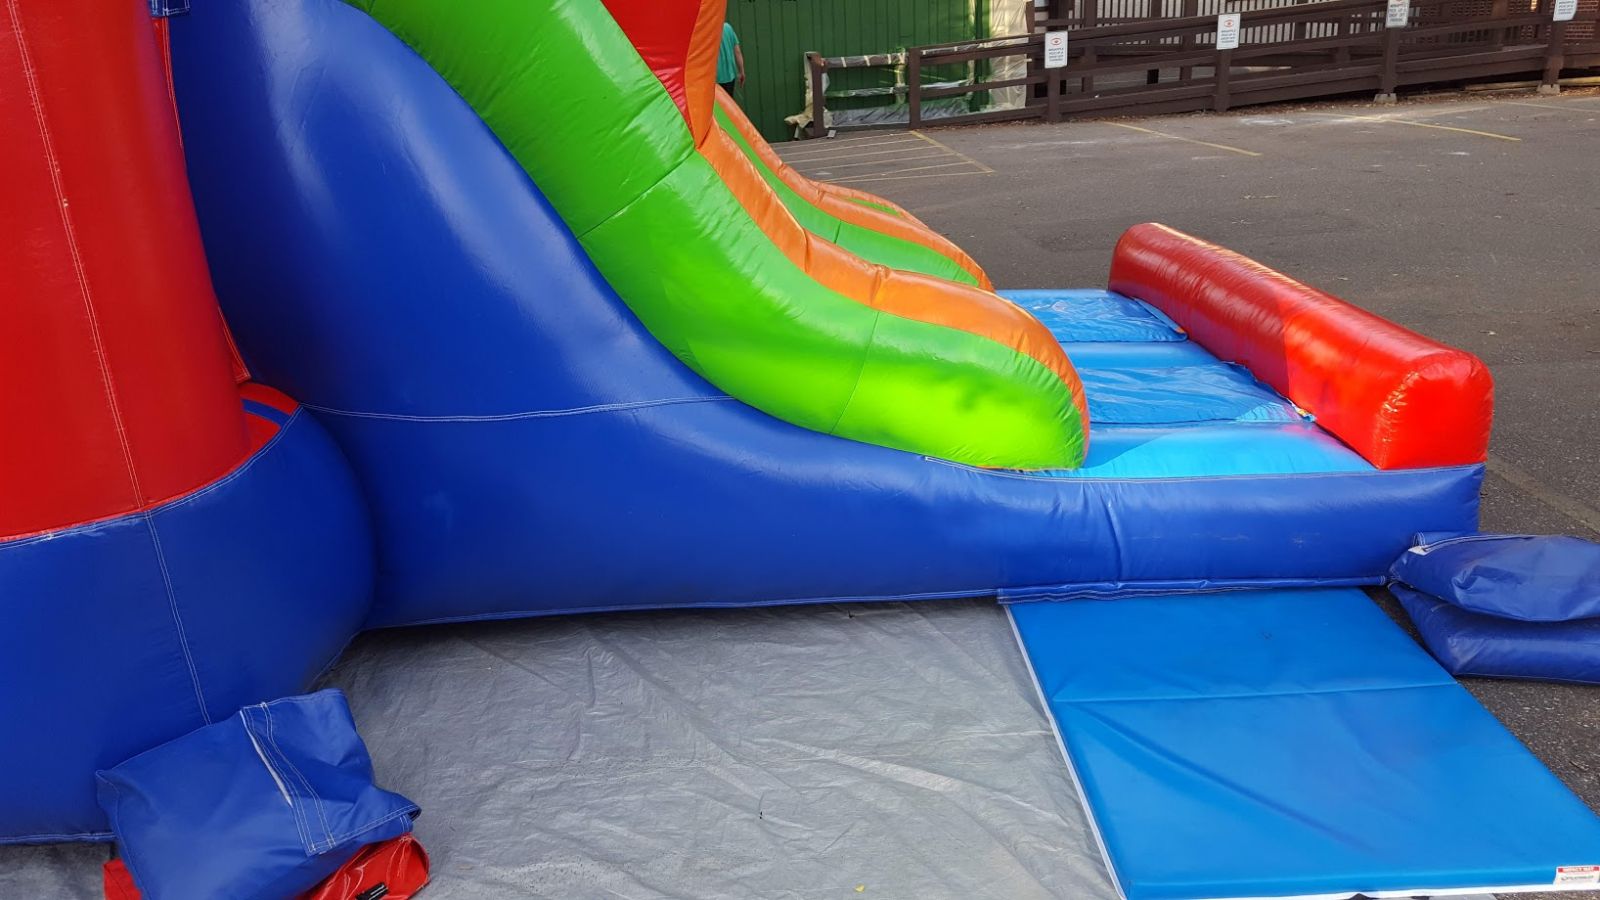 Bounce house exit surrounded by mats for safety